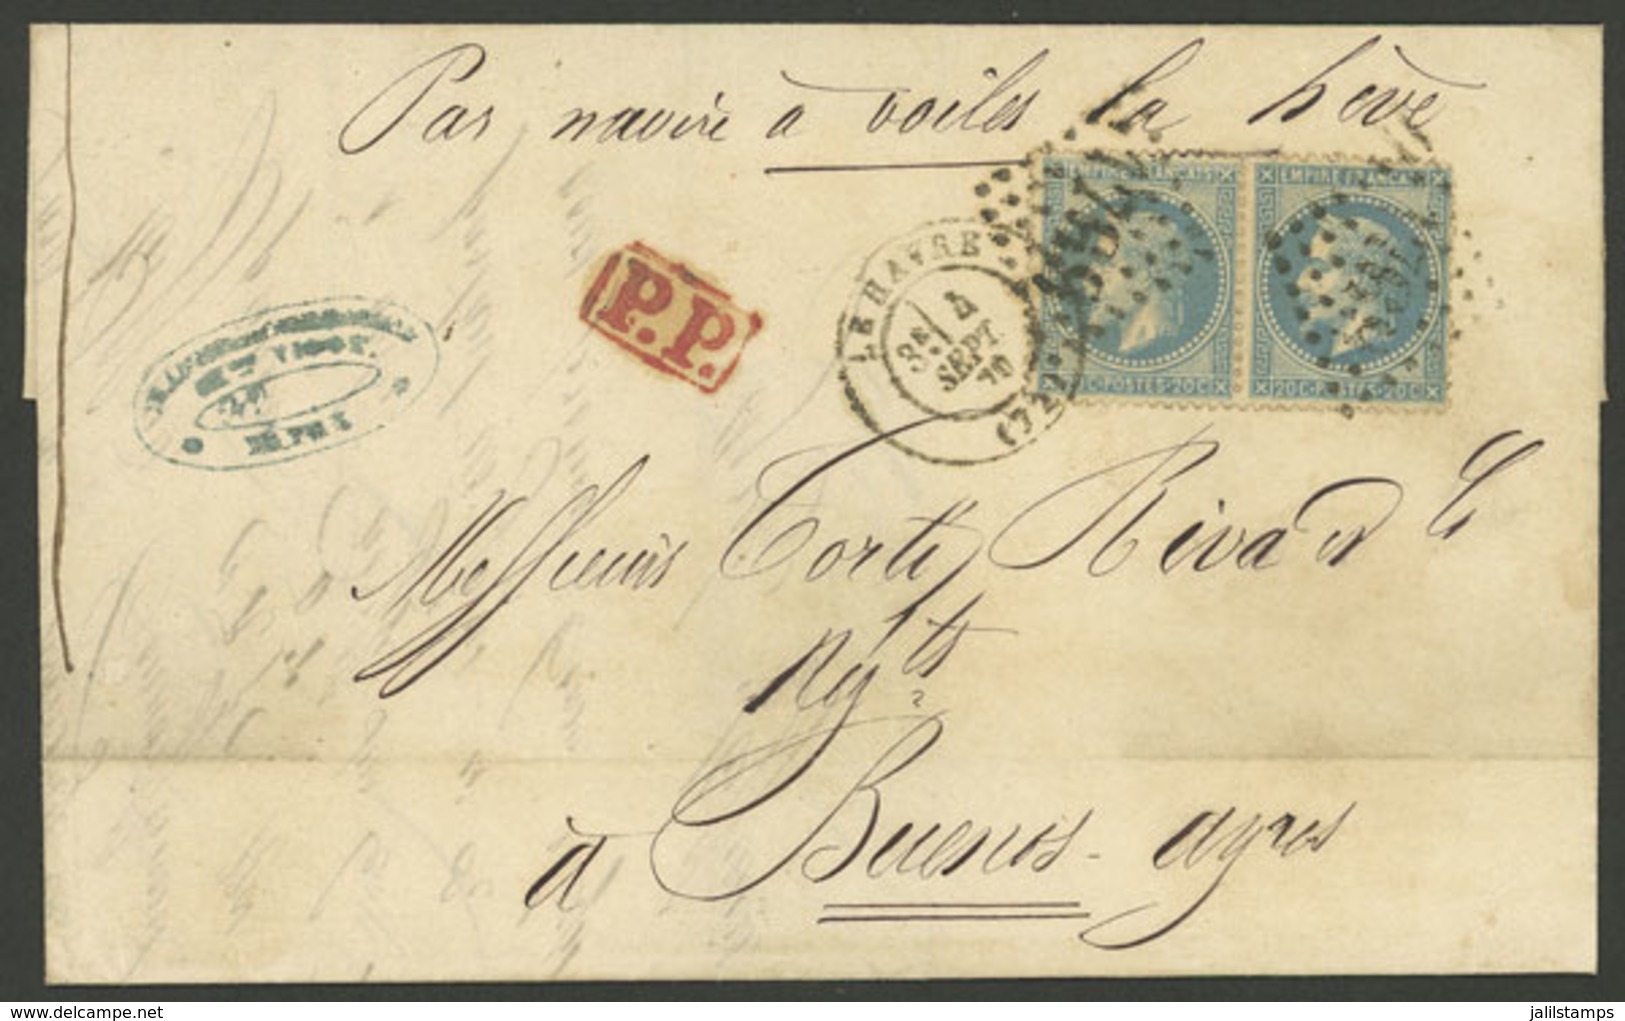 FRANCE: 4/SE/1870 Le Havre - Buenos Aires "by Sailing Ship From Le Havre", Folded Cover Franked With 40c. (pair 20c. Nap - 1863-1870 Napoléon III. Laure